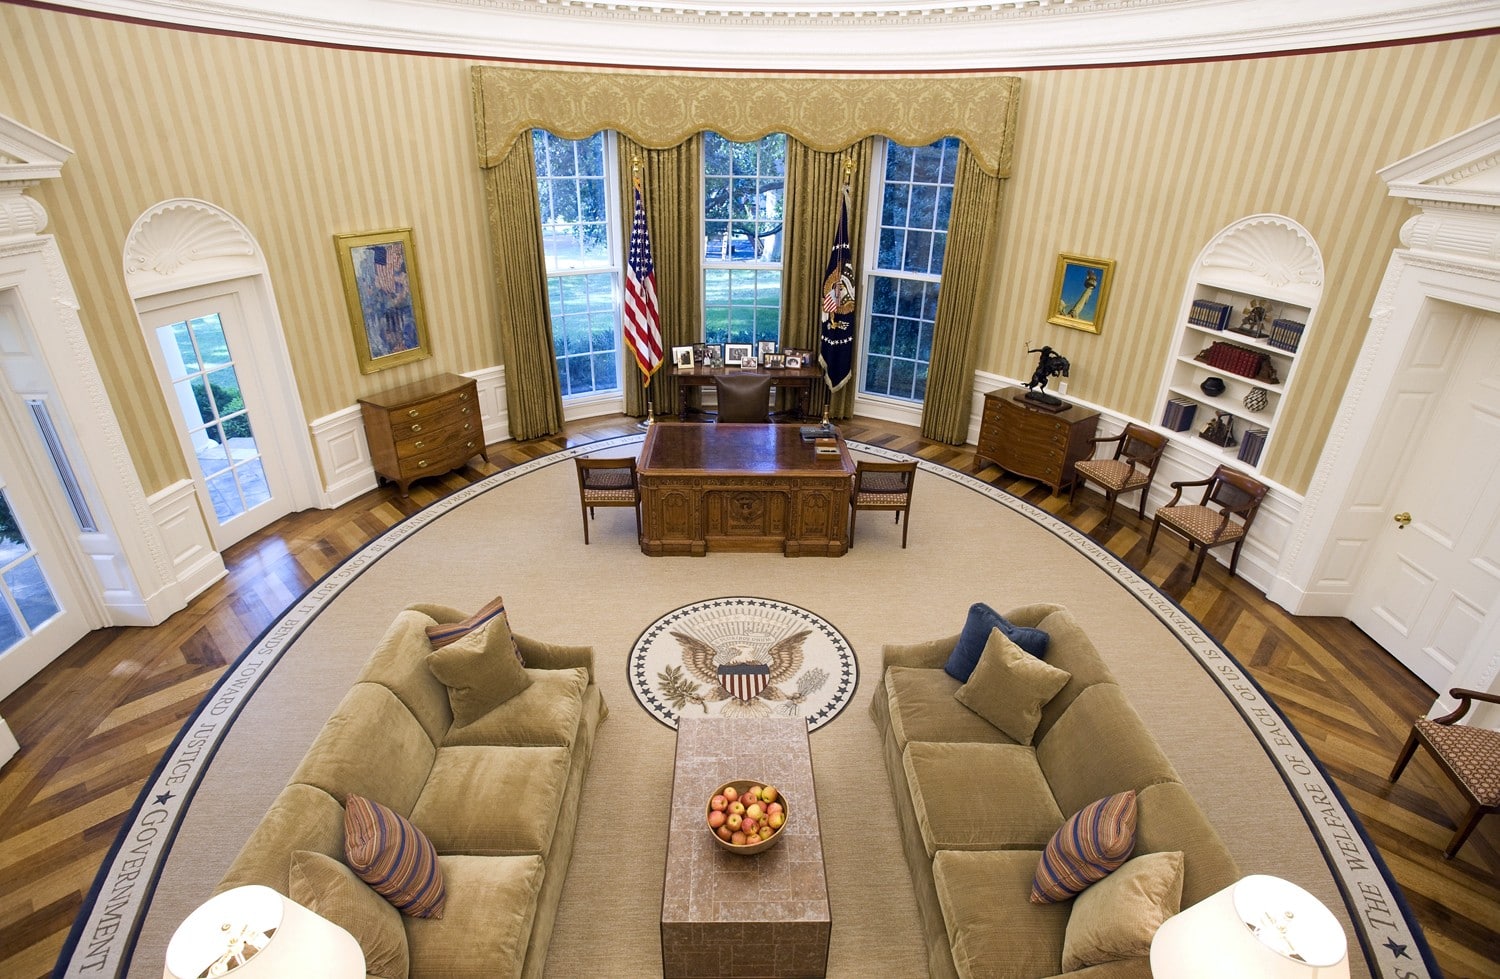 Can You Score 14/17 in This Random Knowledge Quiz? White House Oval Office